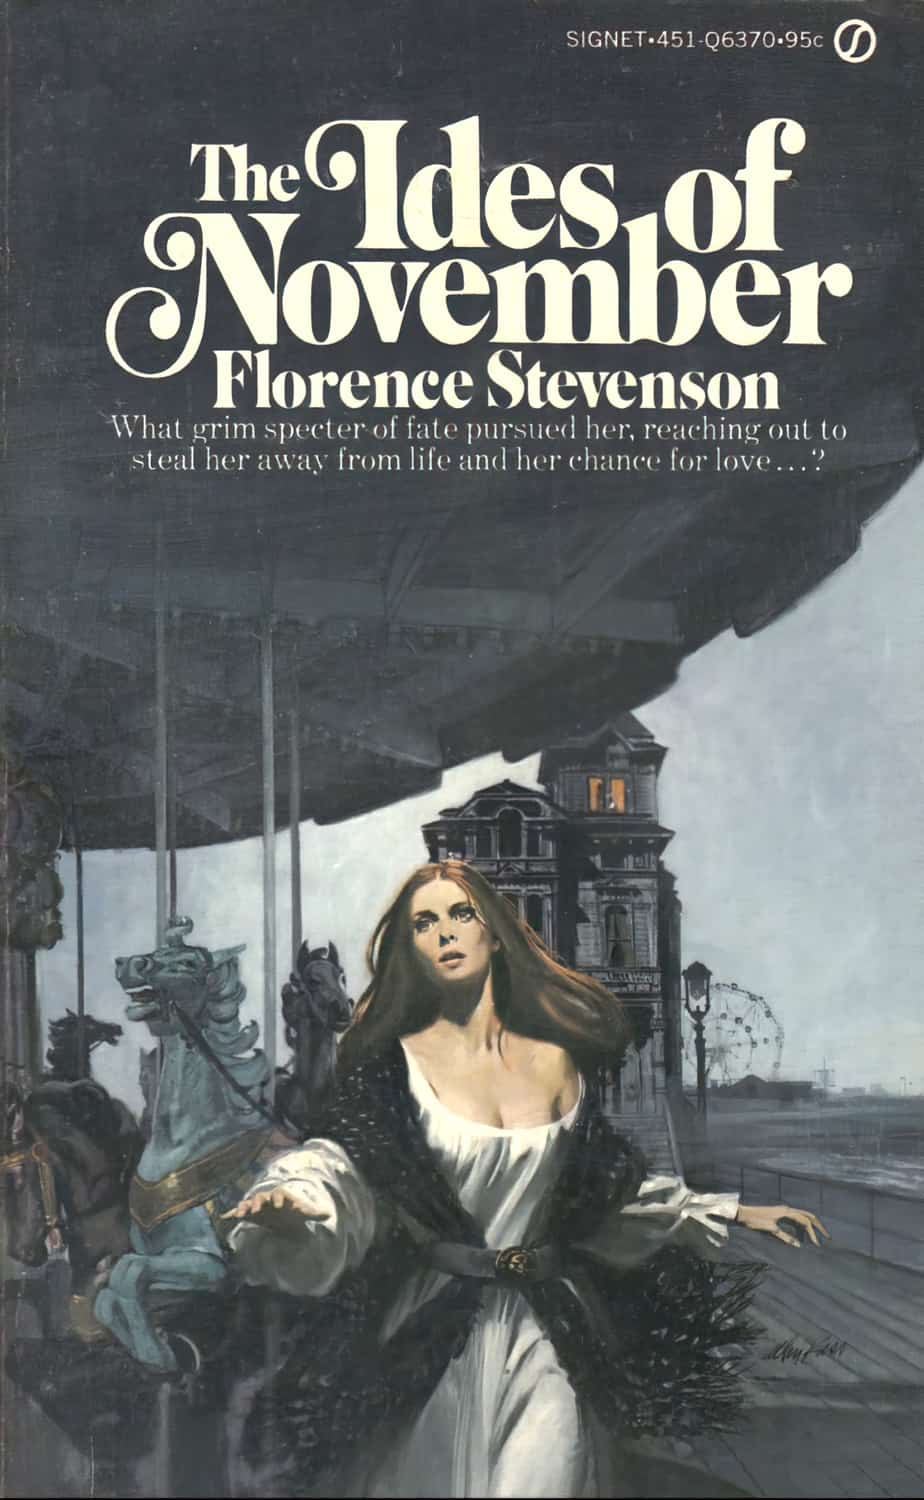 The cover of The Ides of November combines the young woman running away from a castle trope with the horror of a children's fairground.